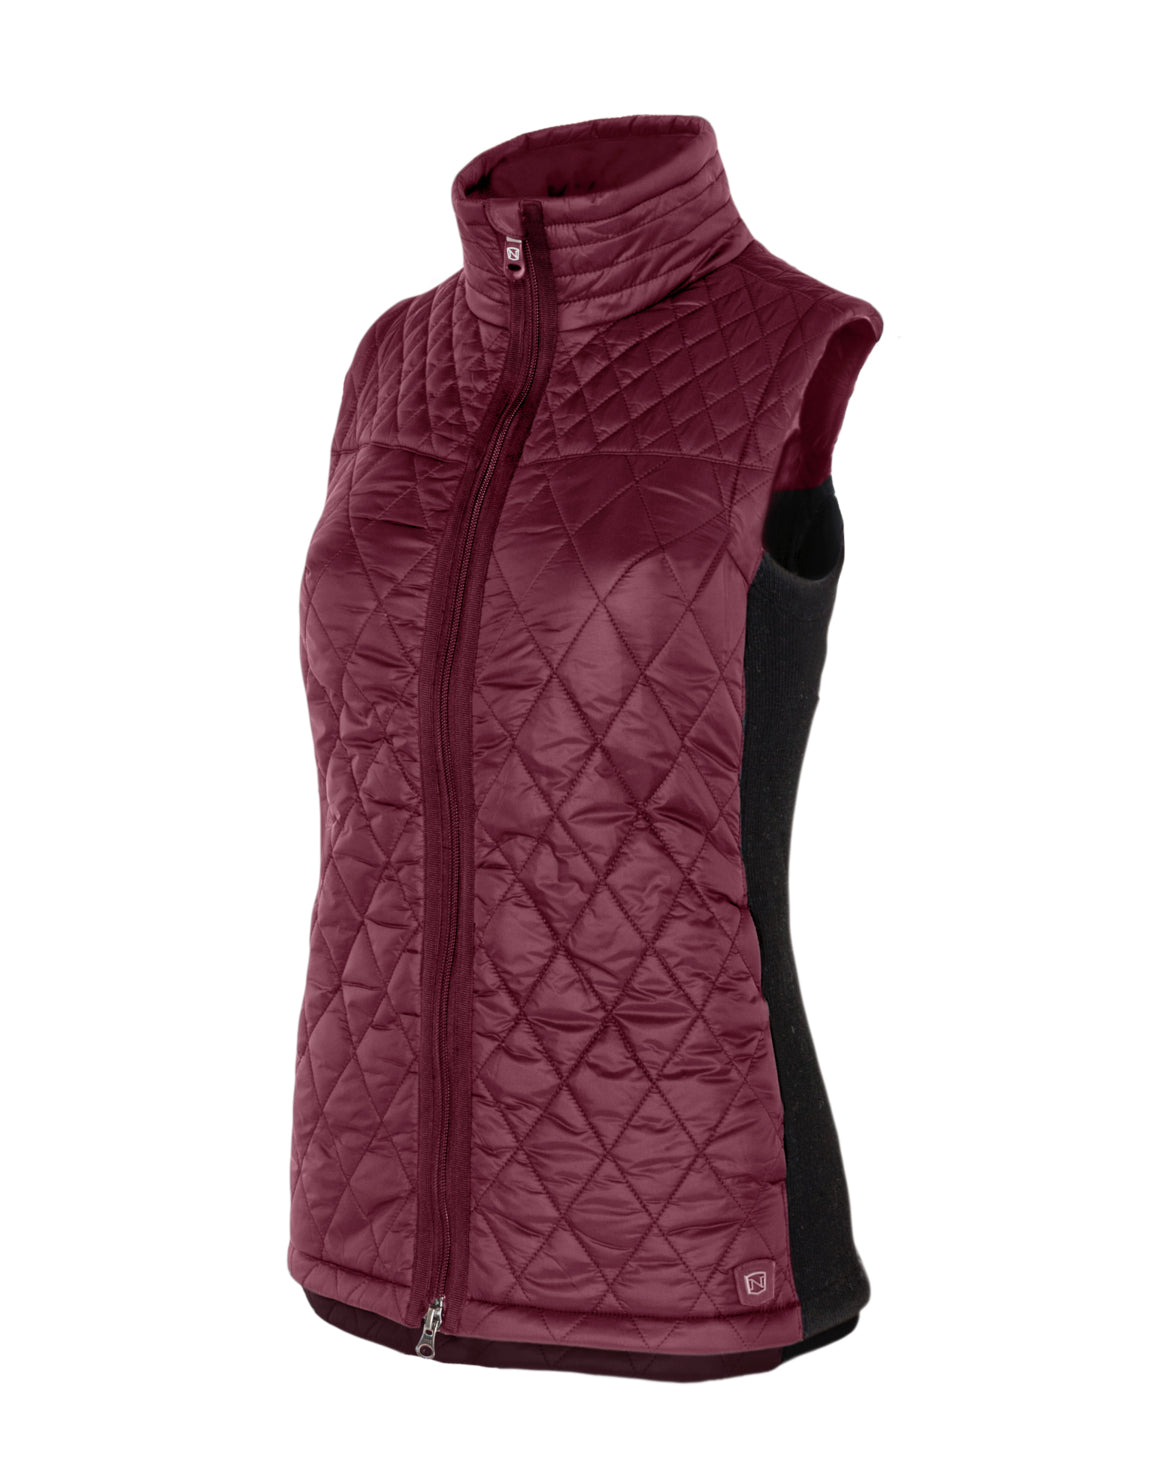 Noble Outfitters Classic Quilted Vest - SALE - North Shore Saddlery